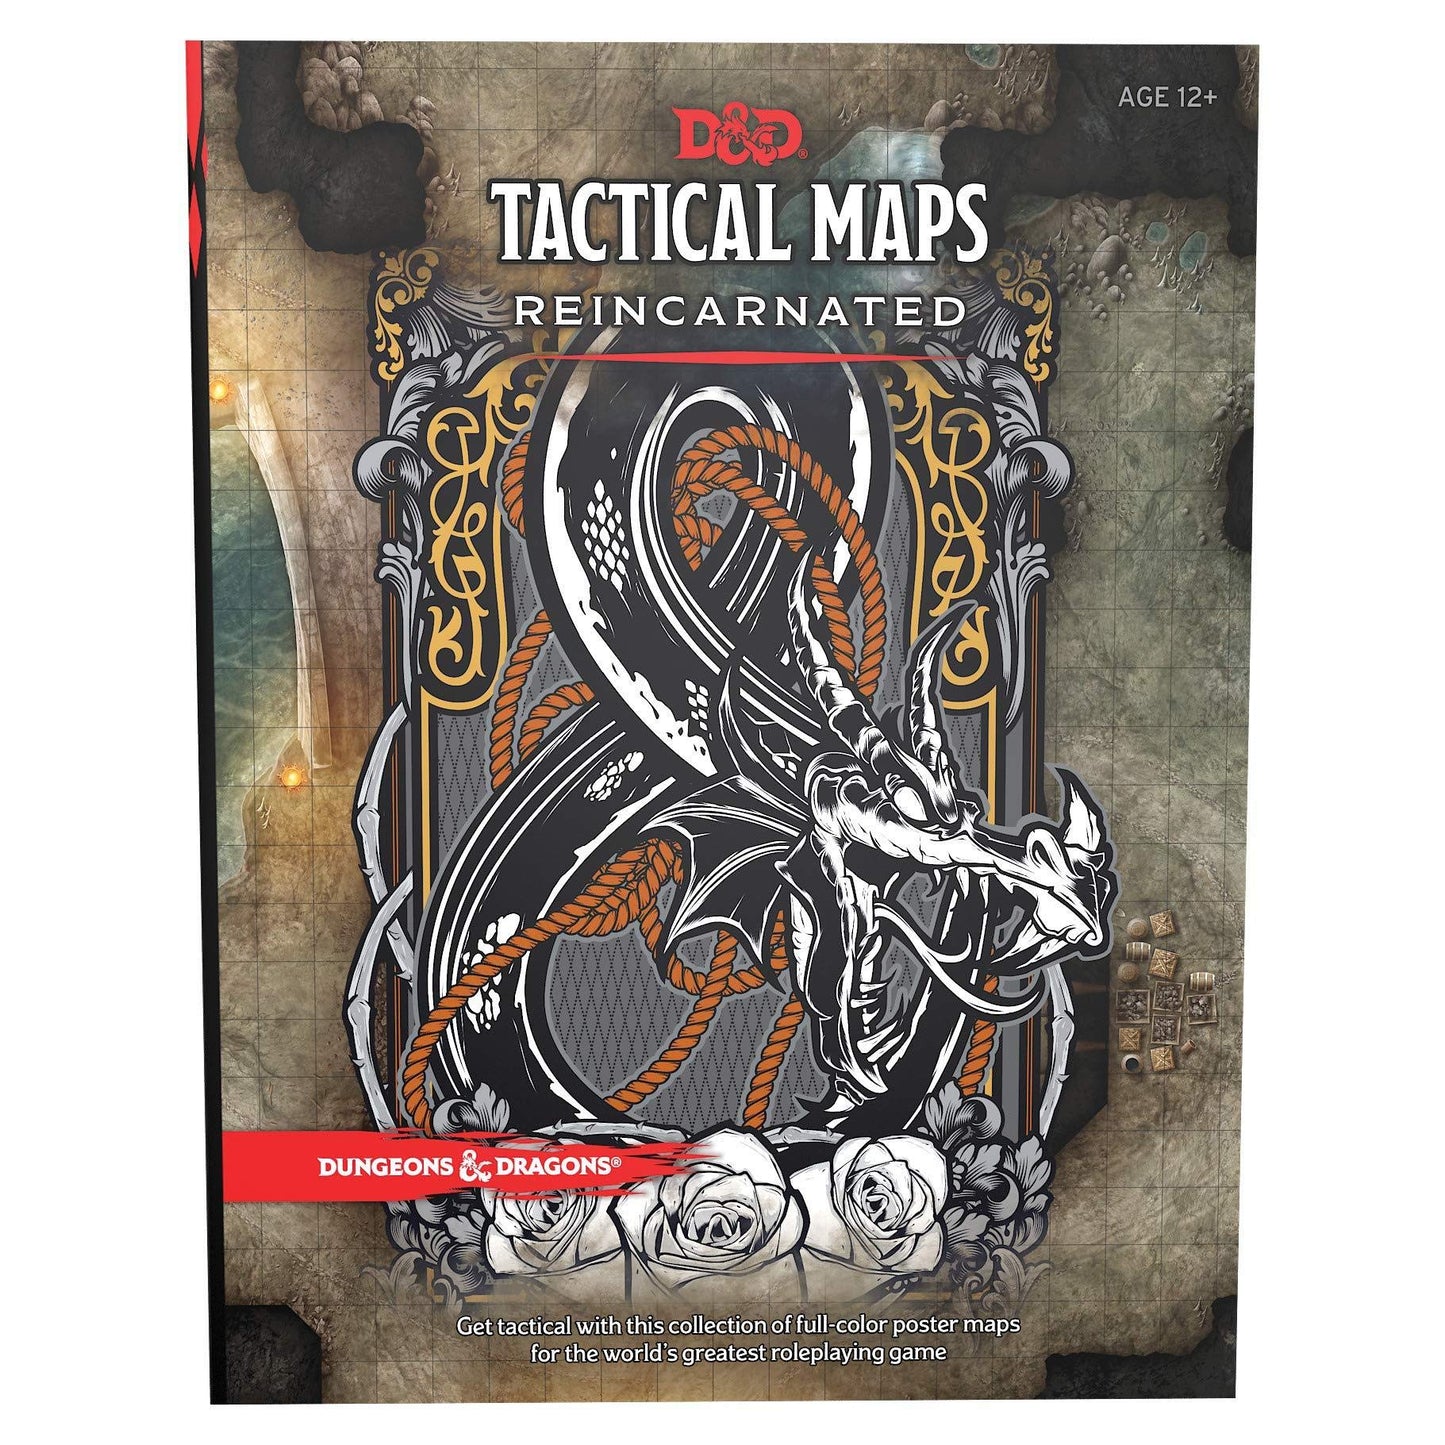 TACTICAL MAPS REINCARNATED